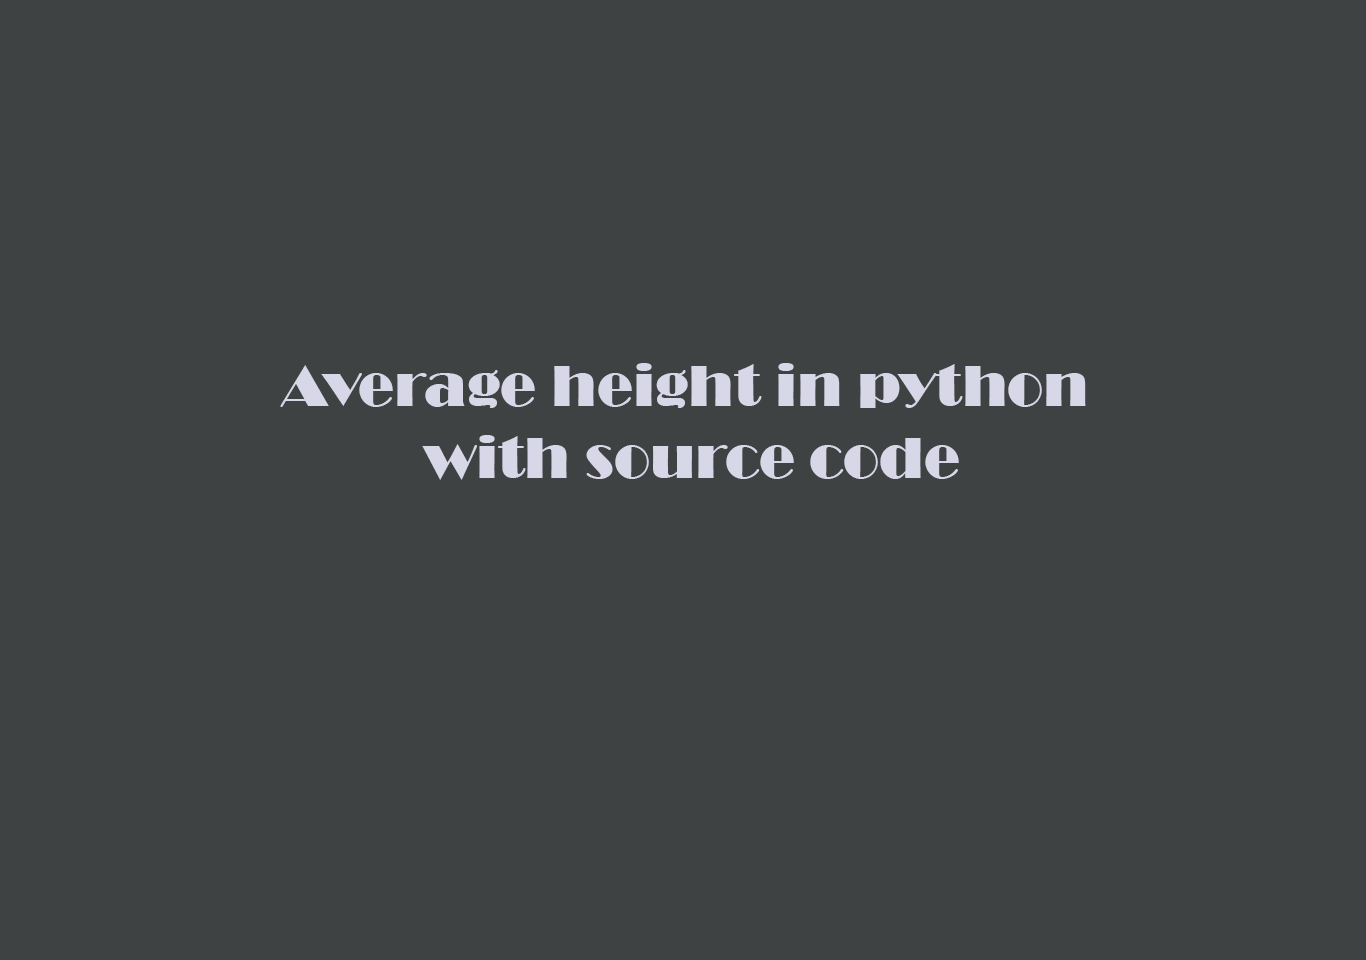 Average height in python with source code